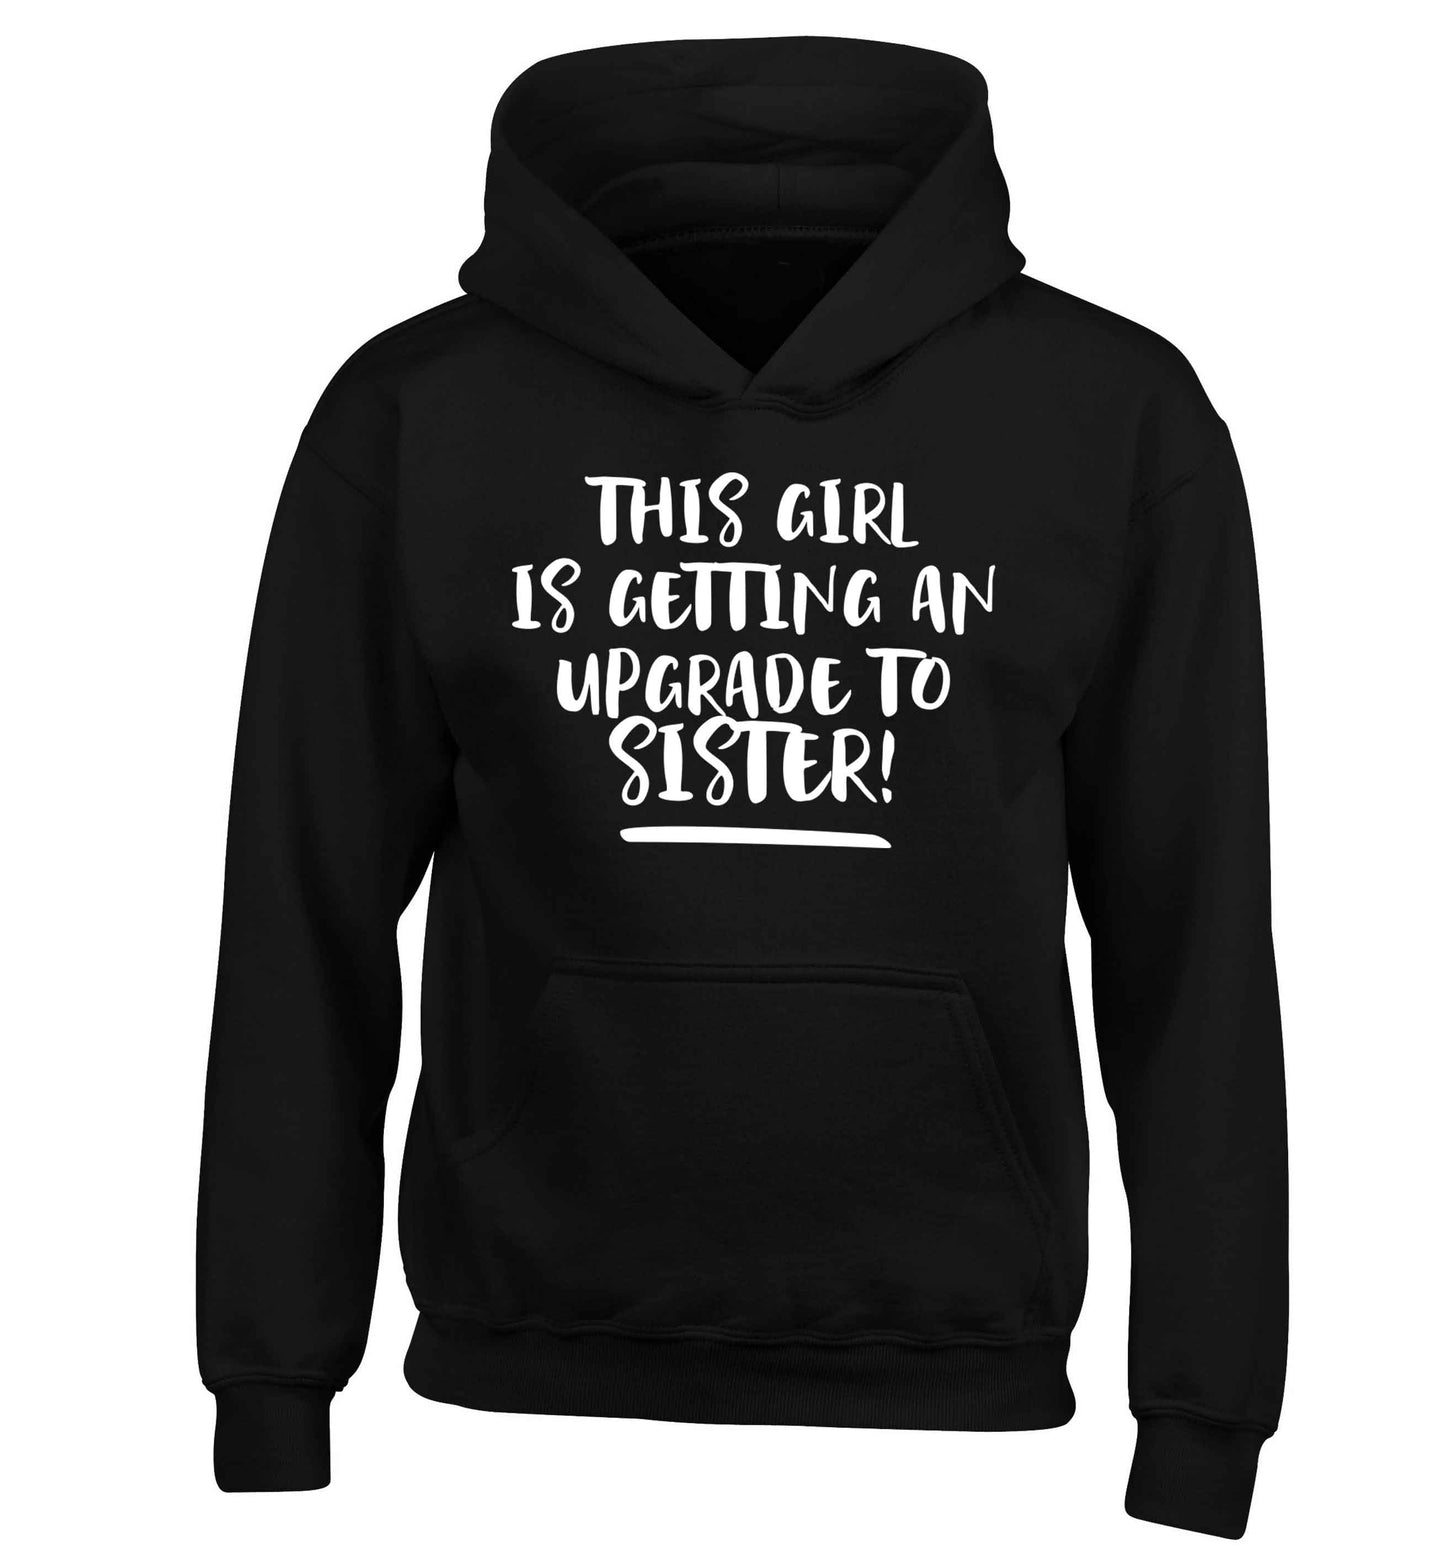 This girl is getting an upgrade to sister! children's black hoodie 12-13 Years